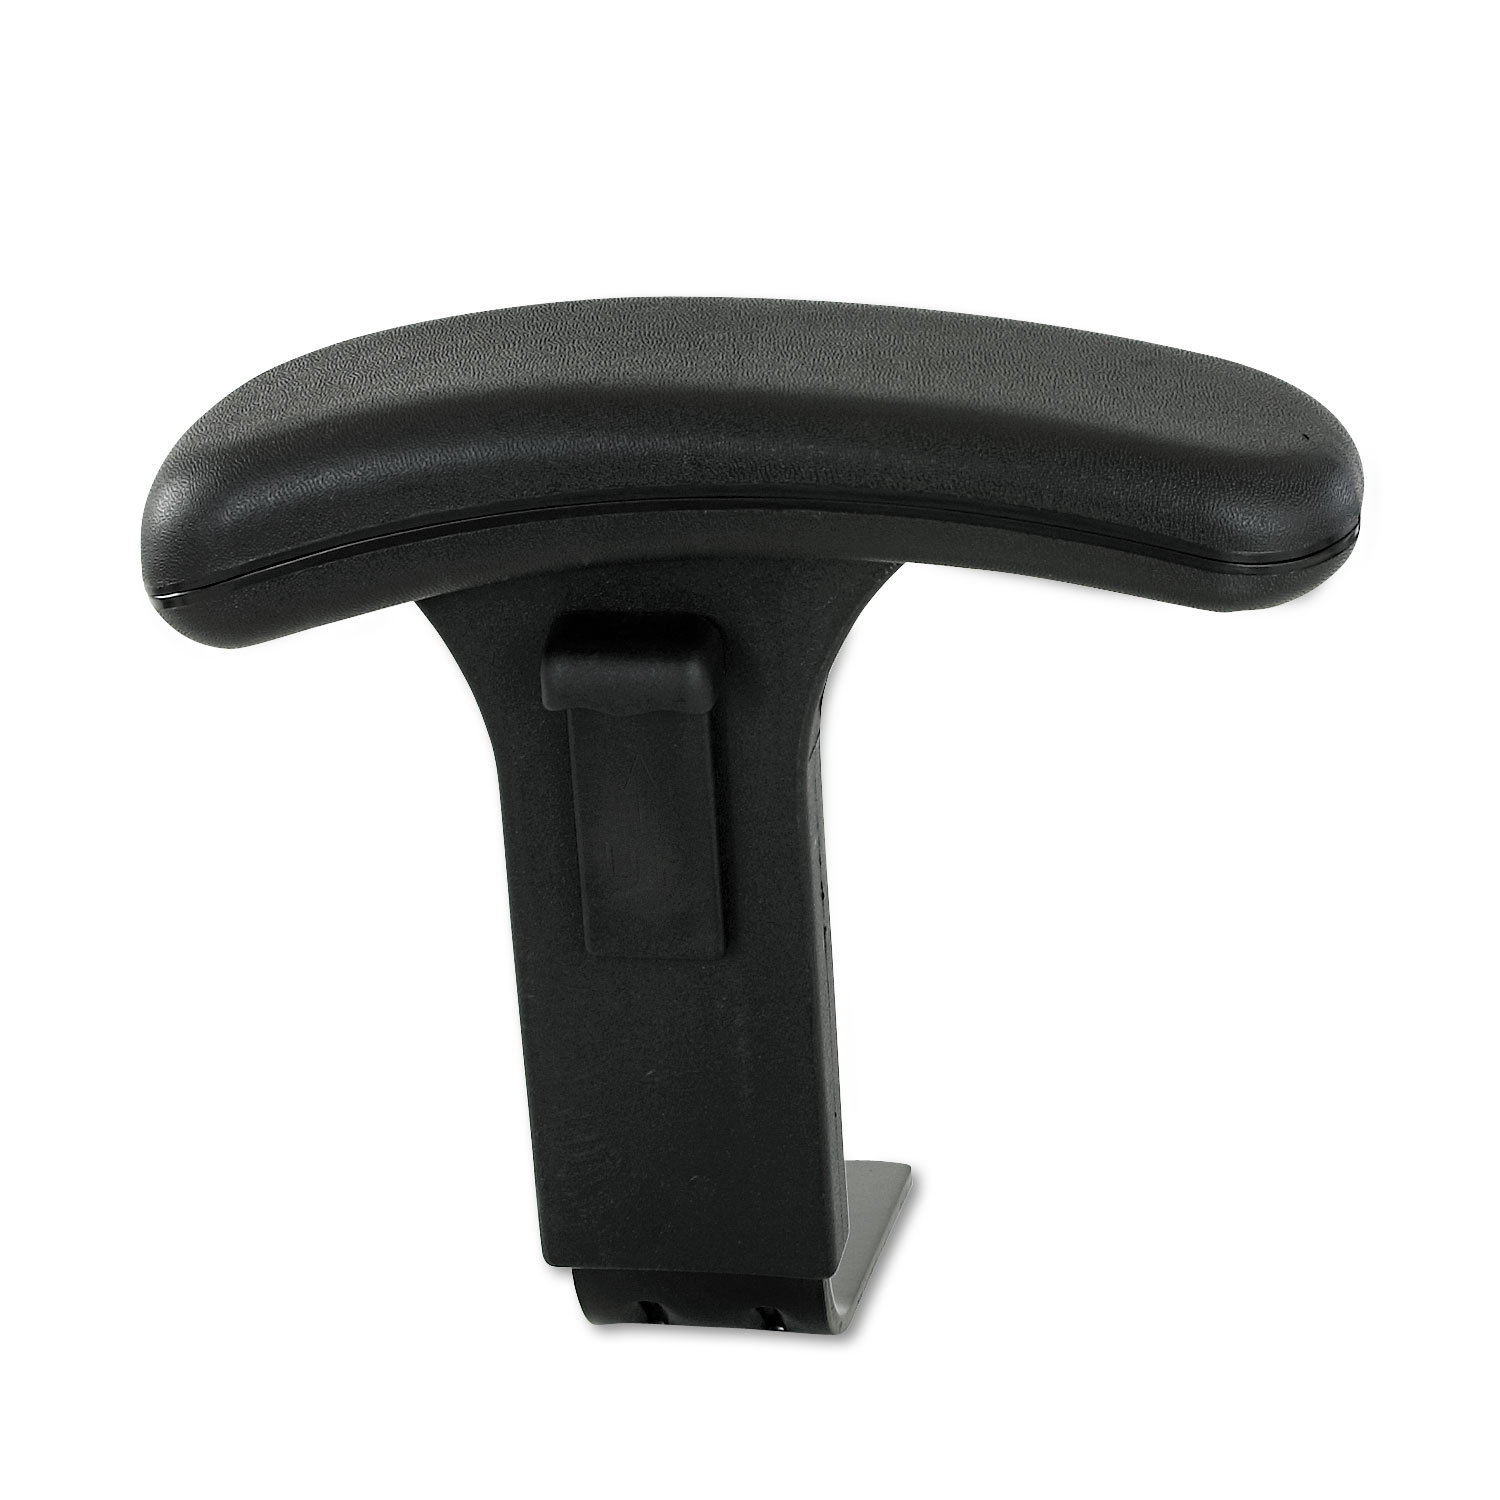  Safco 3496BL Height Adjustable T-Pad Arms for Safco Uber Big and Tall Chairs, Black (SAF3496BL) 